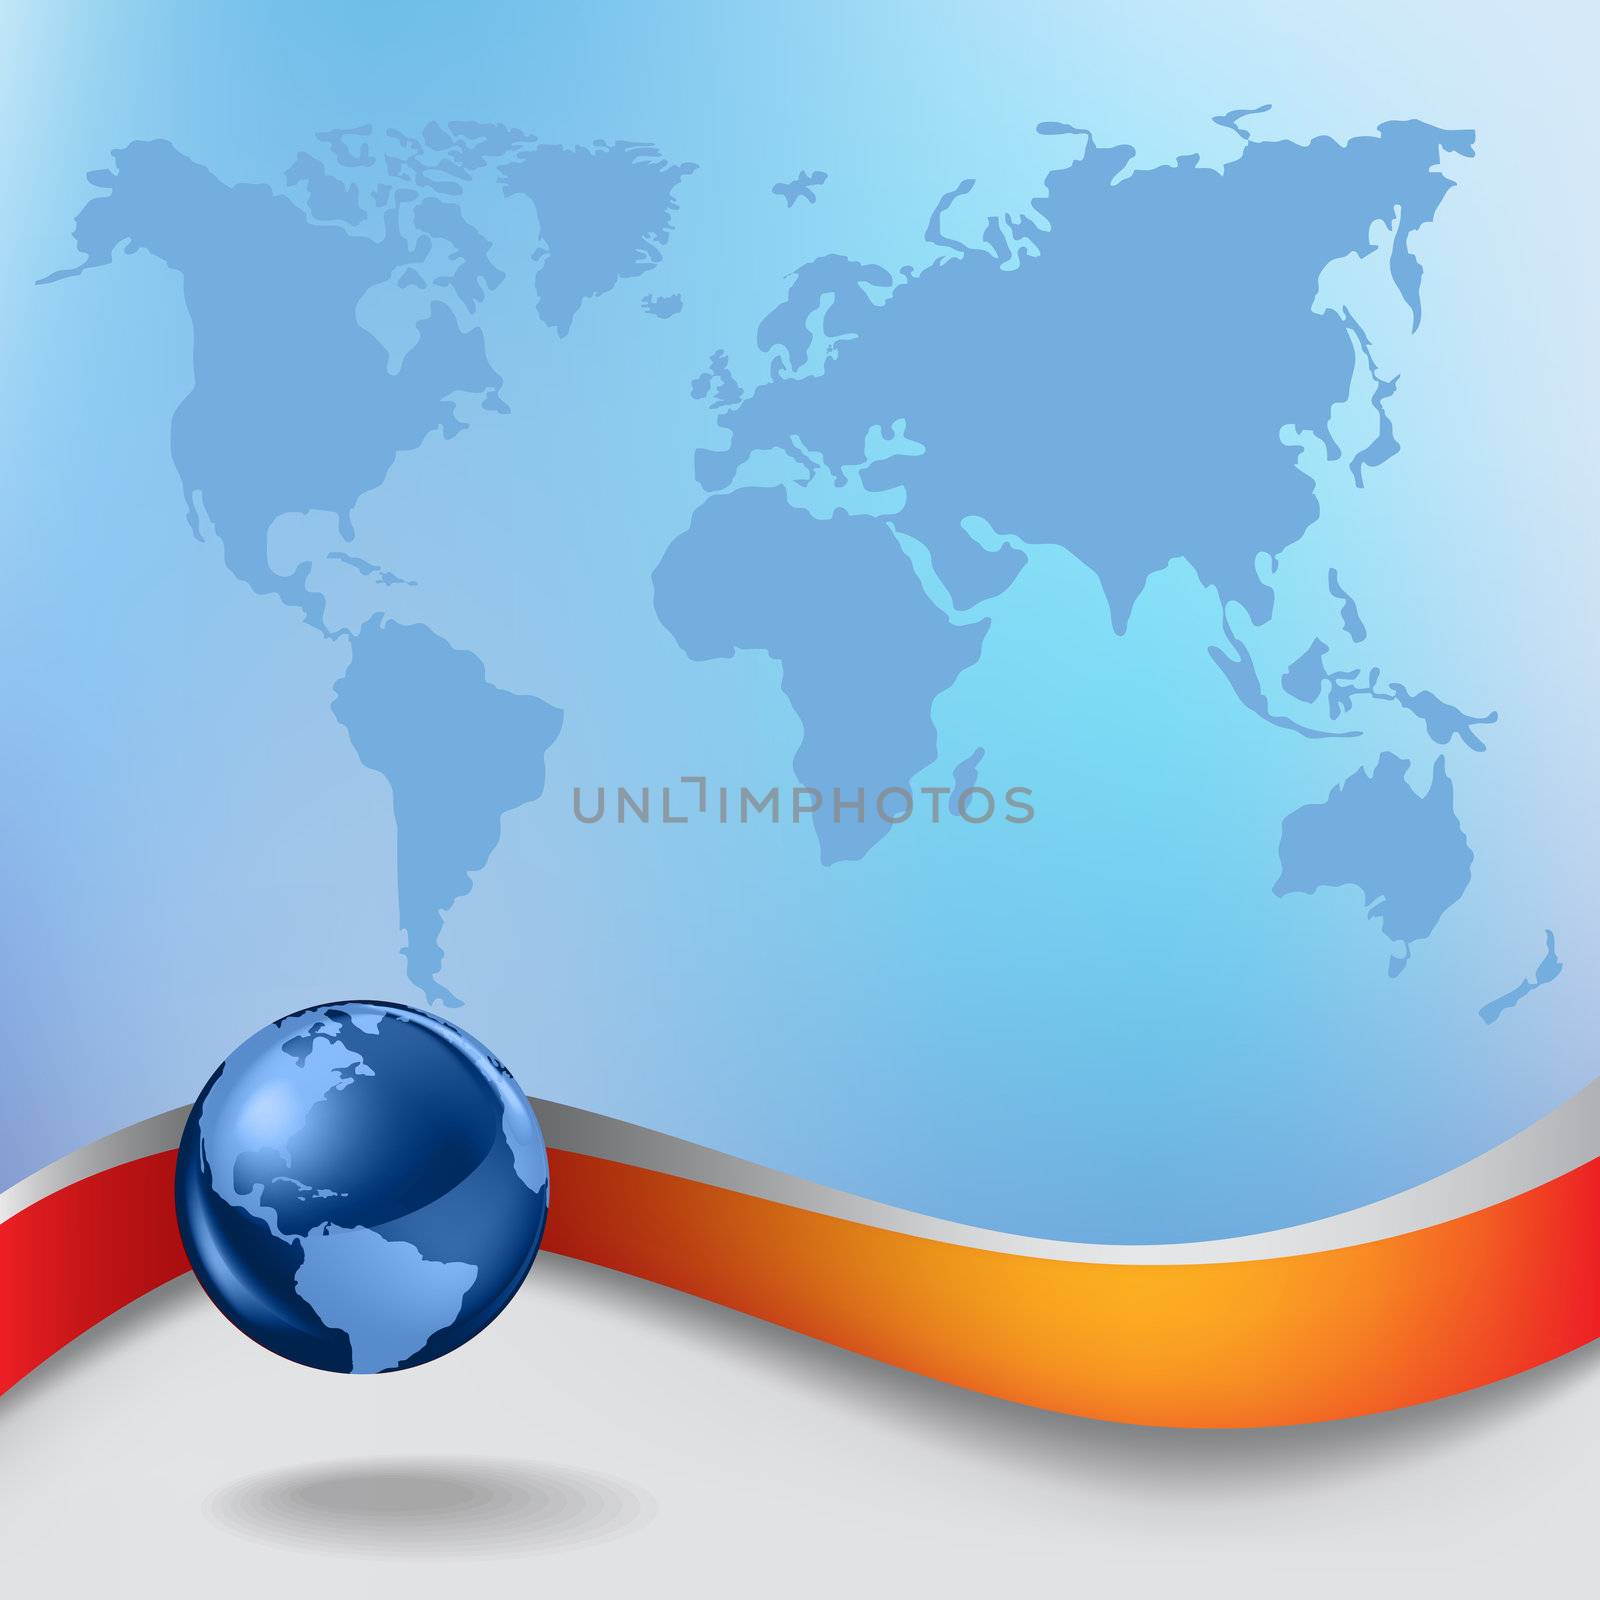 Abstract business background with blue globe and earth map